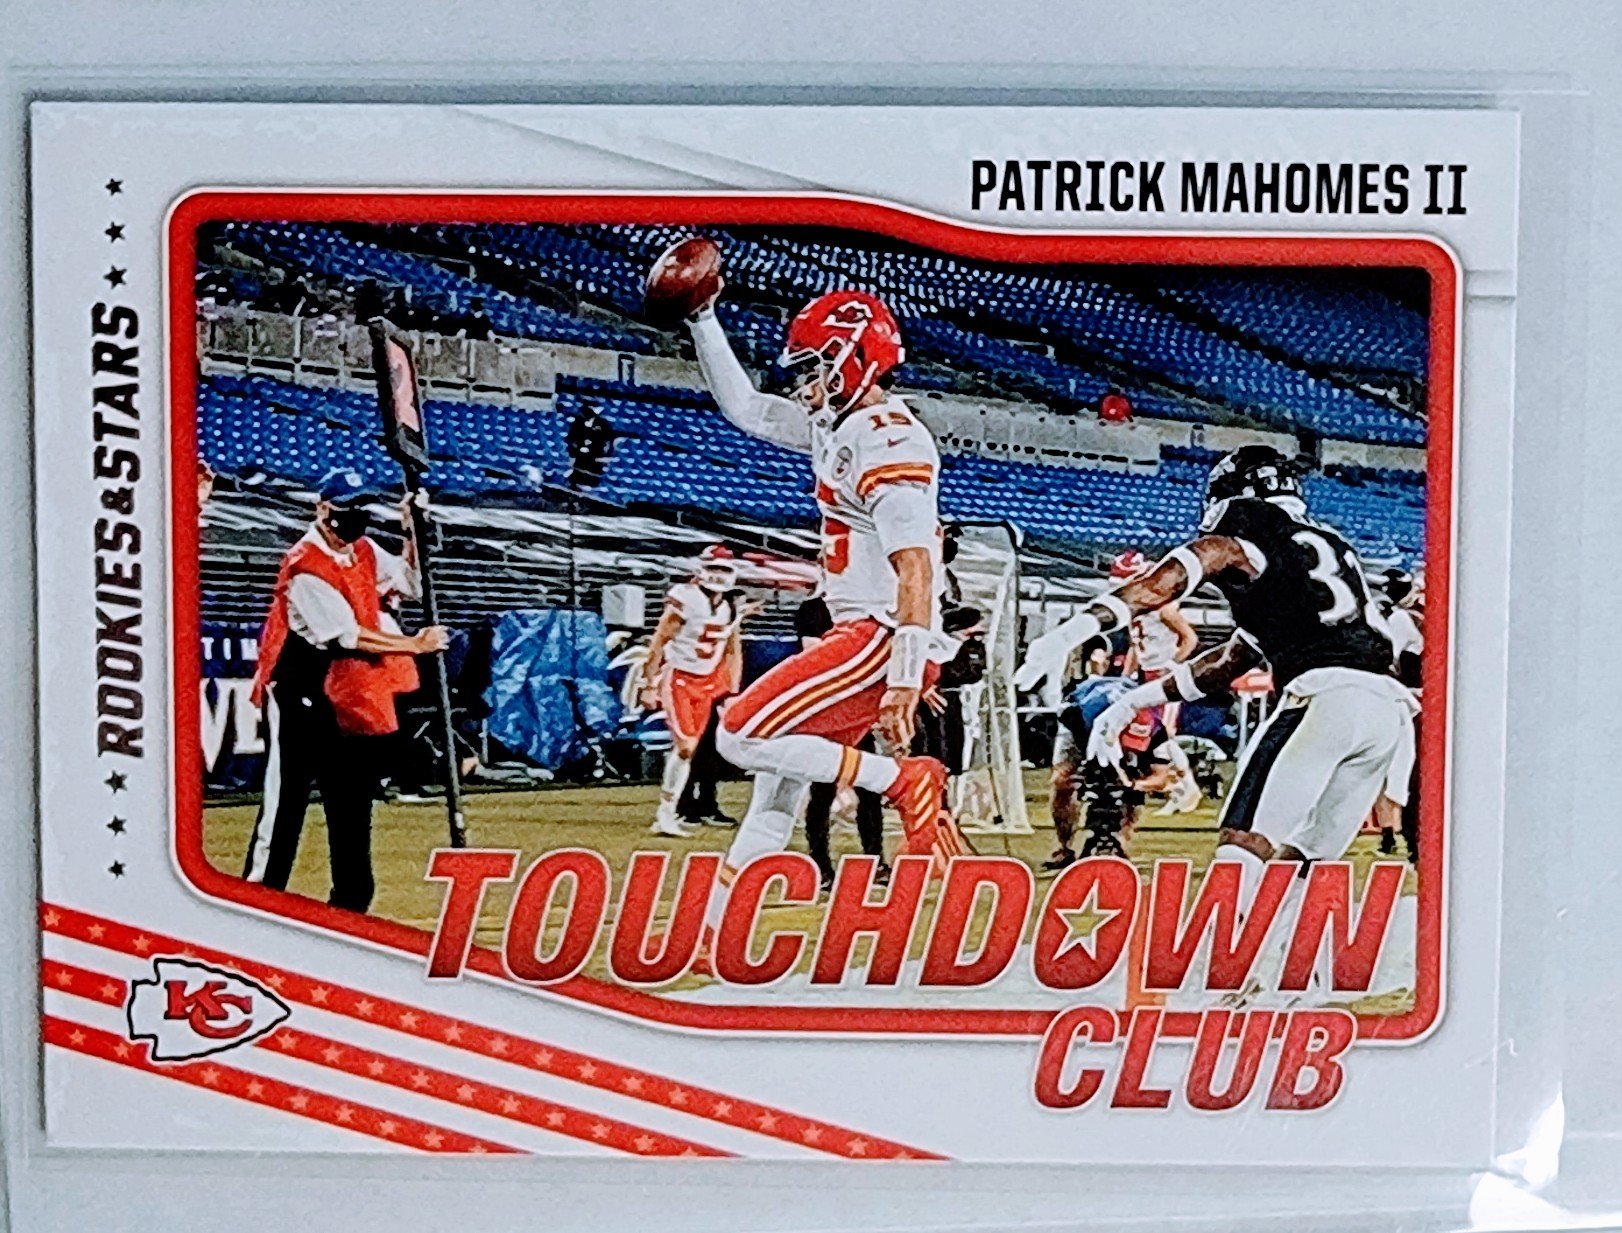 2021 Panini Rookies and Stars Patrick Mahomes II Touchdown Club Football Card AVM1 simple Xclusive Collectibles   